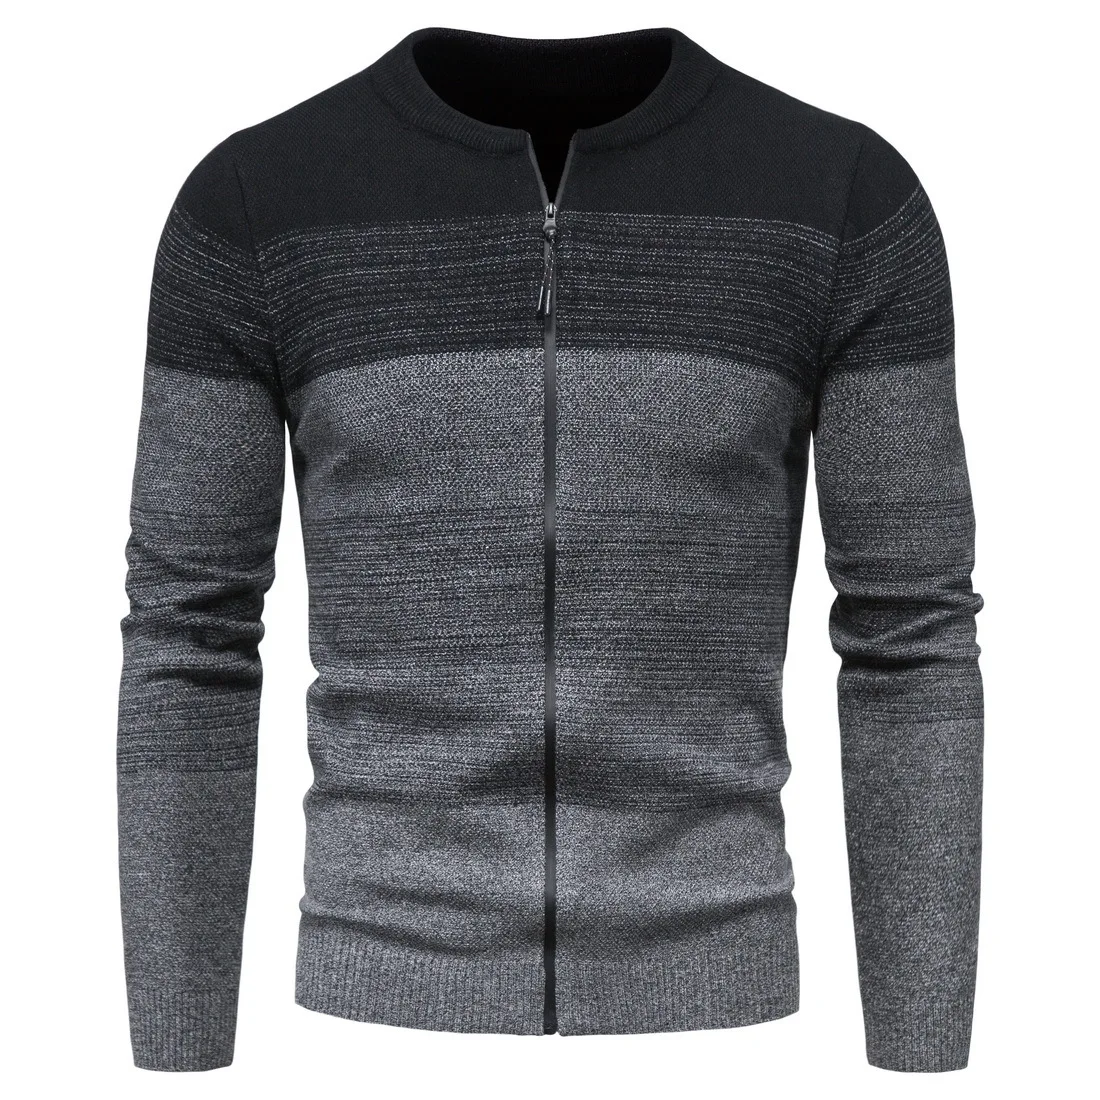 New Sweaters Men Cardigan Hooded Slim Fit Jumpers Knitting Thick Warm Winter Korean Style Casual Clothing Men